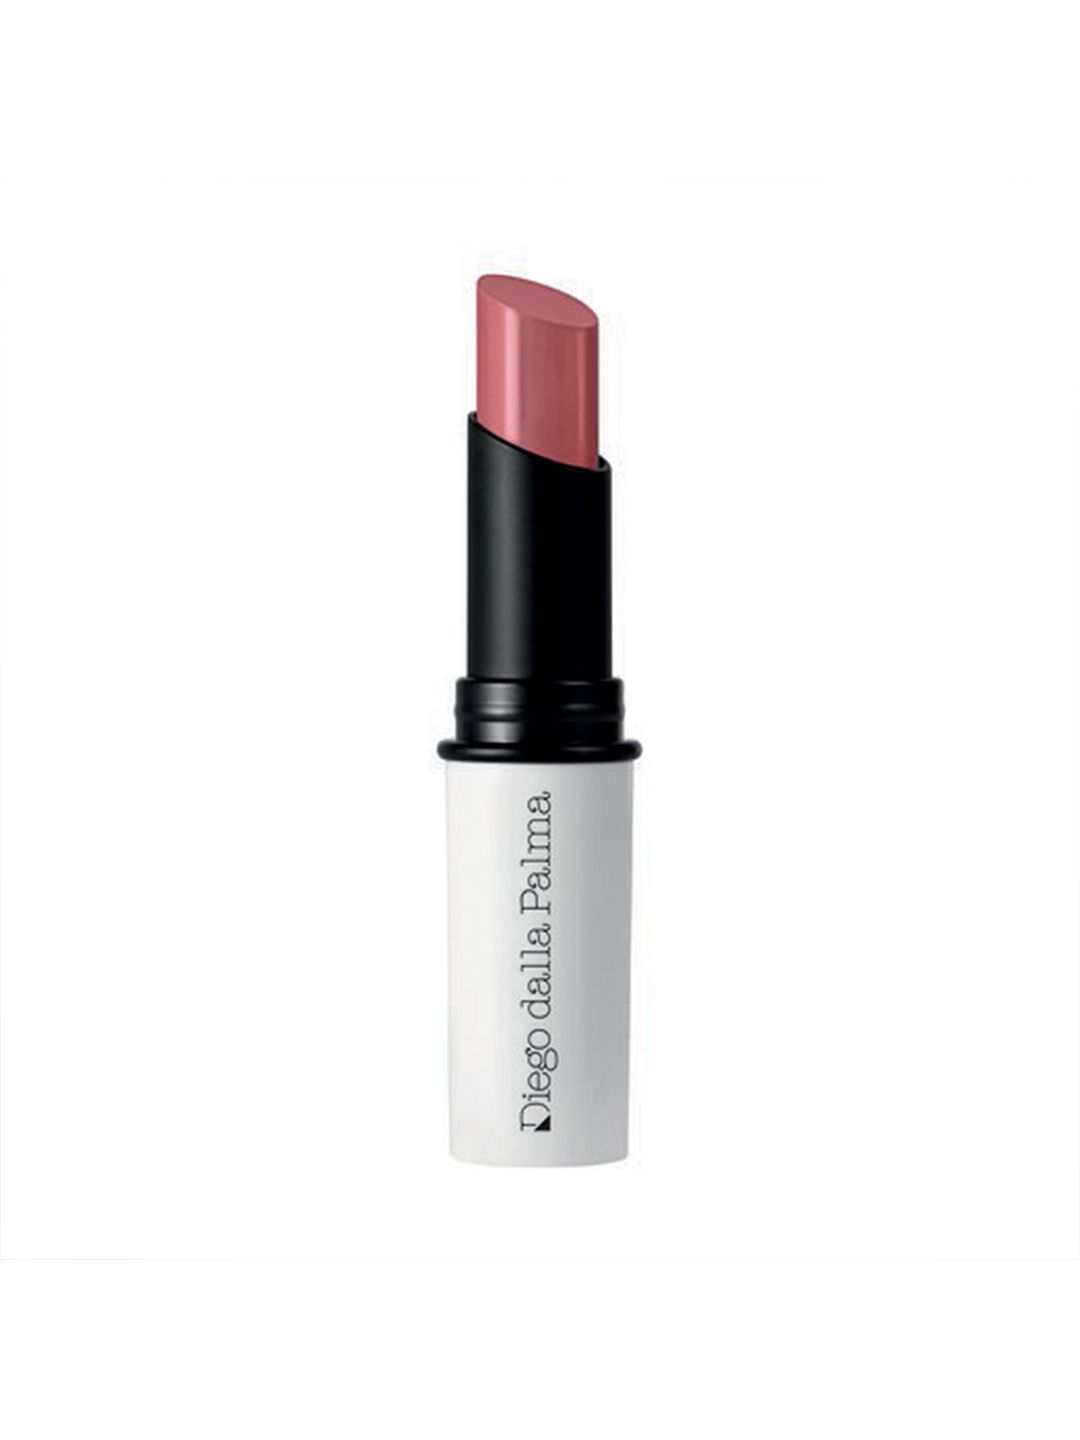 Diego dalla Palma MILANO Semitransparent Shiny Lipstick with Hyaluronic - Antique Pink 147 Price in India